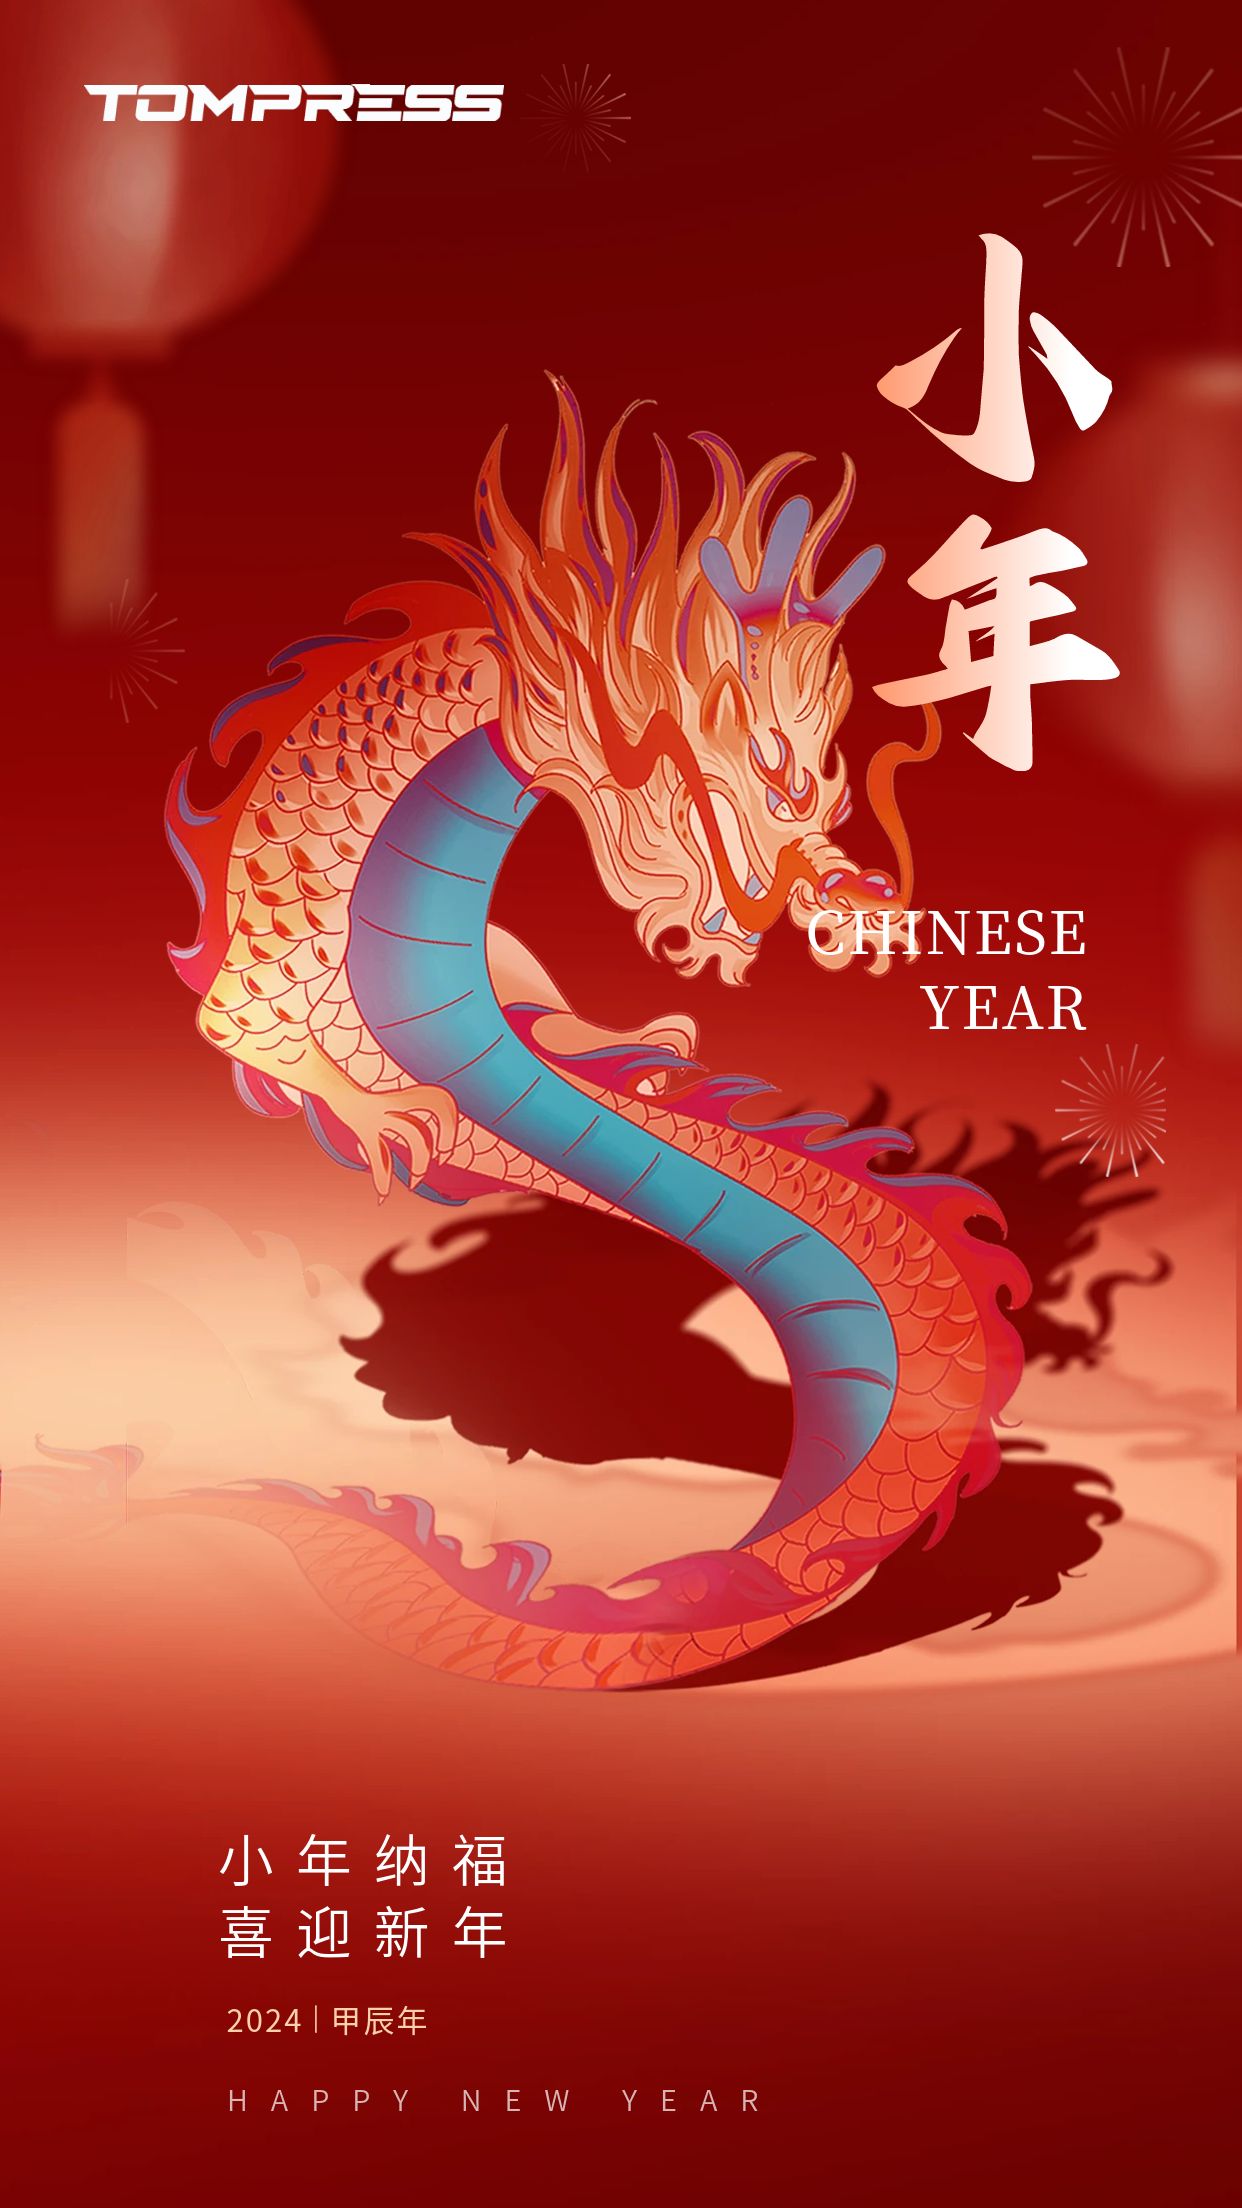 TOMPRESS annual meeting and holidays notice for Chinese New Year 2024